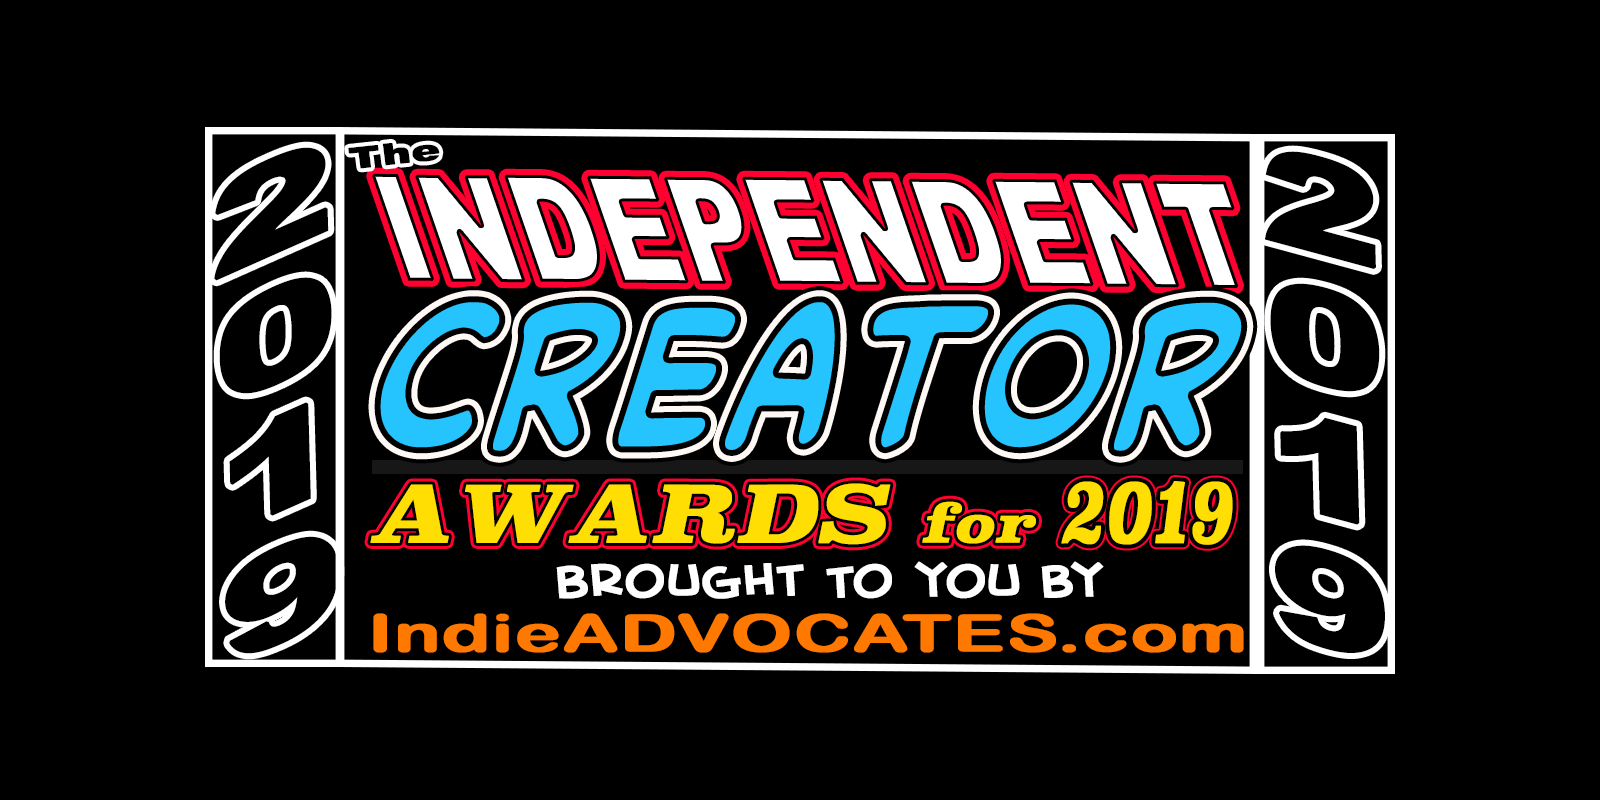 AWARDS SHOW ANNOUNCEMENT The INDEPENDENT CREATOR AWARDS –